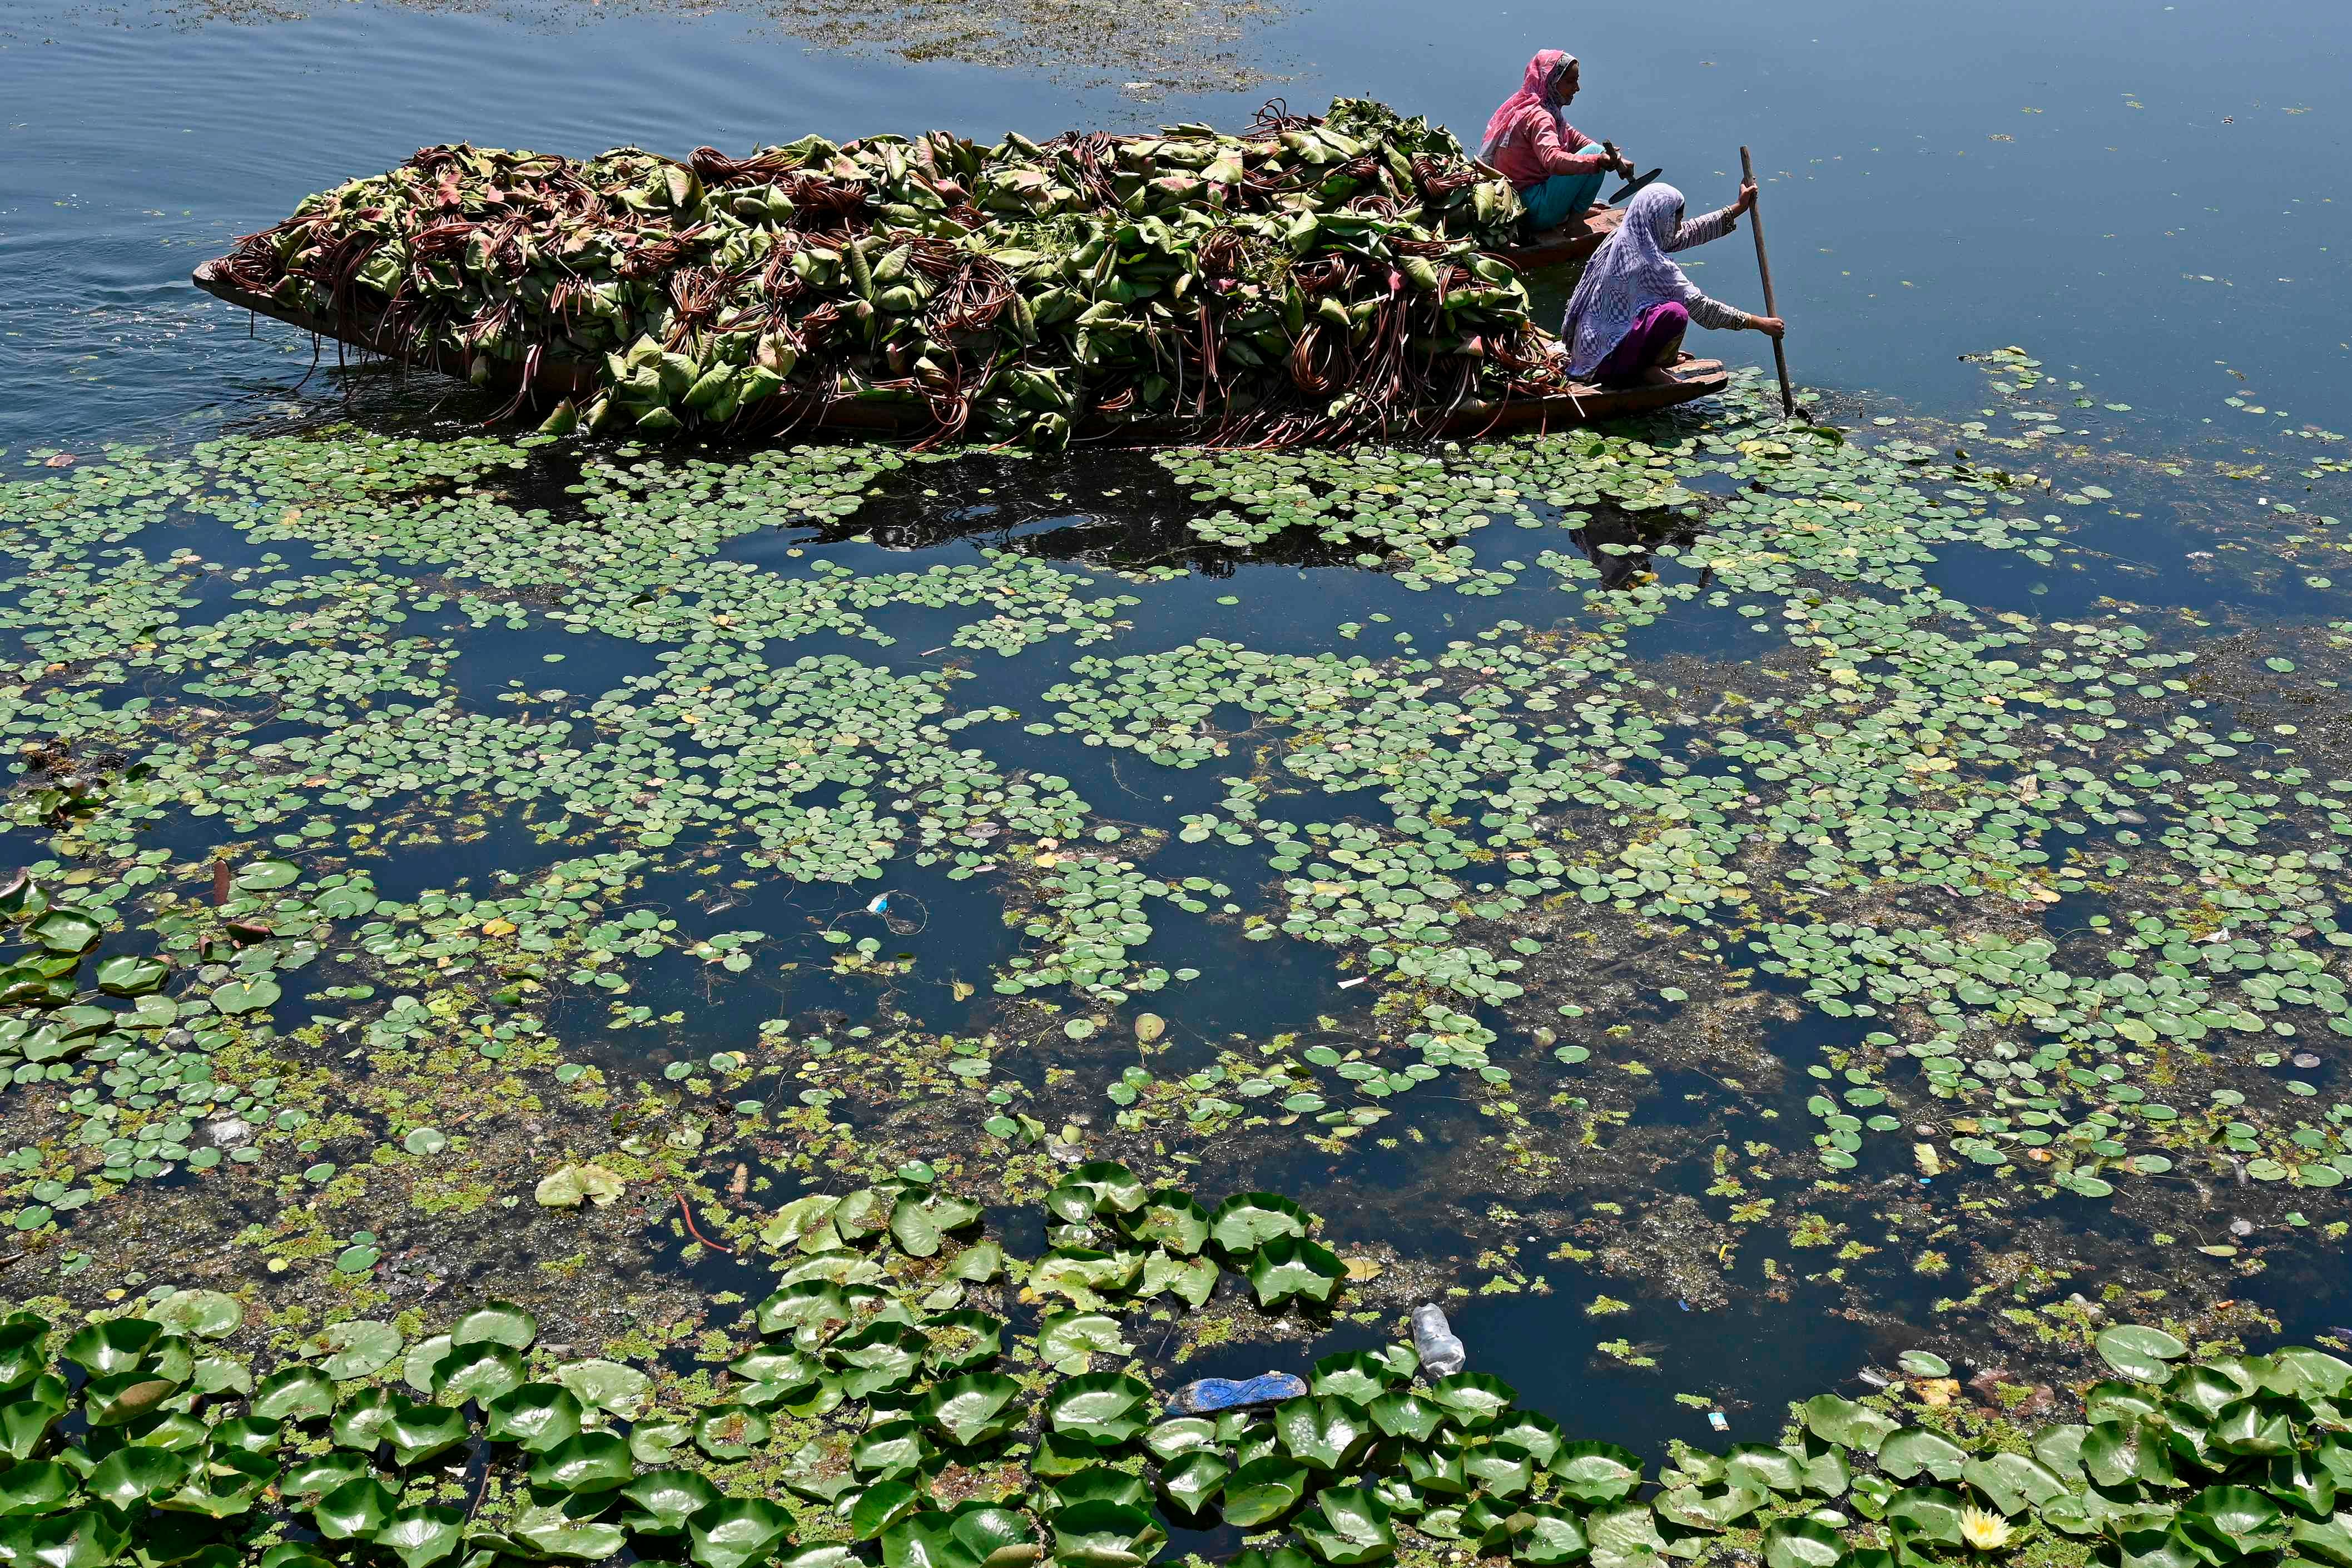 Women row boats carrying lotus roots for cattle through a polluted portion of Dal Lake in Srinagar on July 20, 2020. Credit: AFP